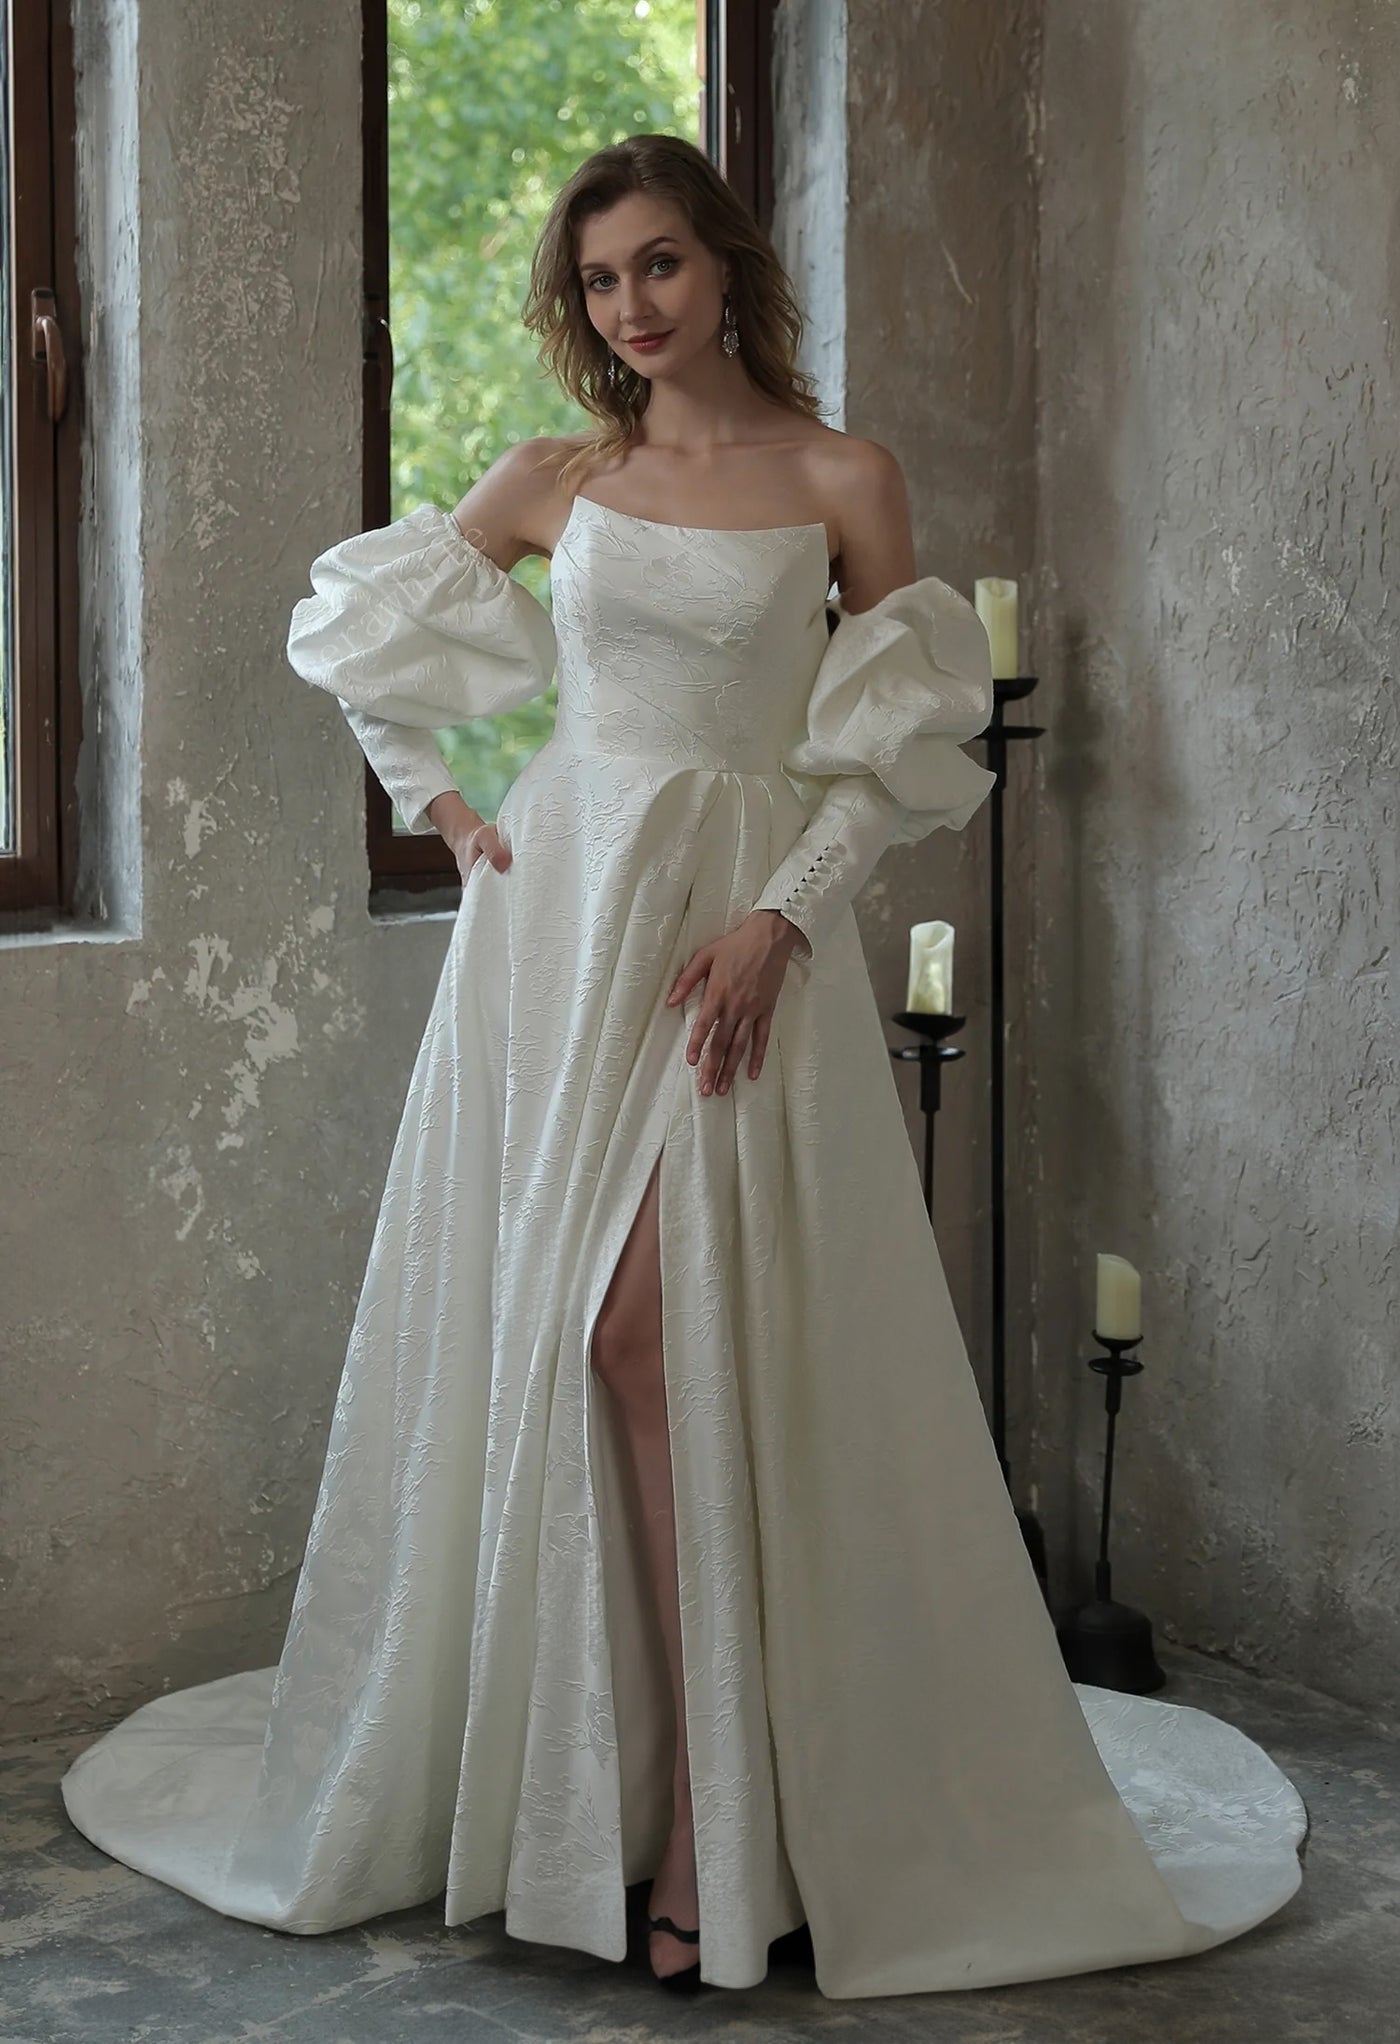 A woman in a white wedding dress is posing in front of a window at Bergamot Bridal, wearing the Modern Scoop Neckline Brocade Satin Ball gown.